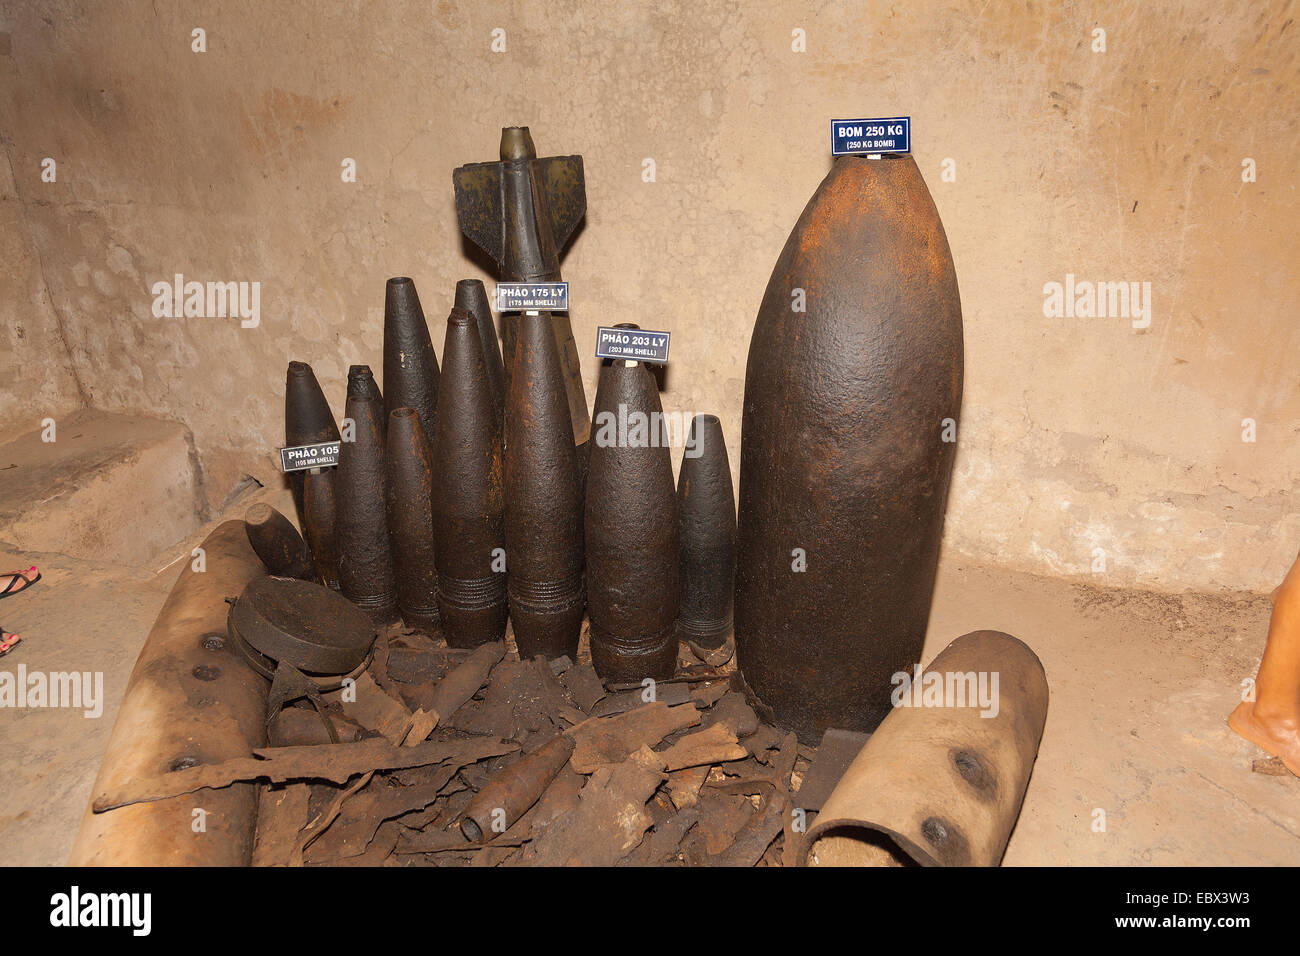 Cu Chi Tunnels Vietnam. Display of various shells used during the US Vietnam War Stock Photo